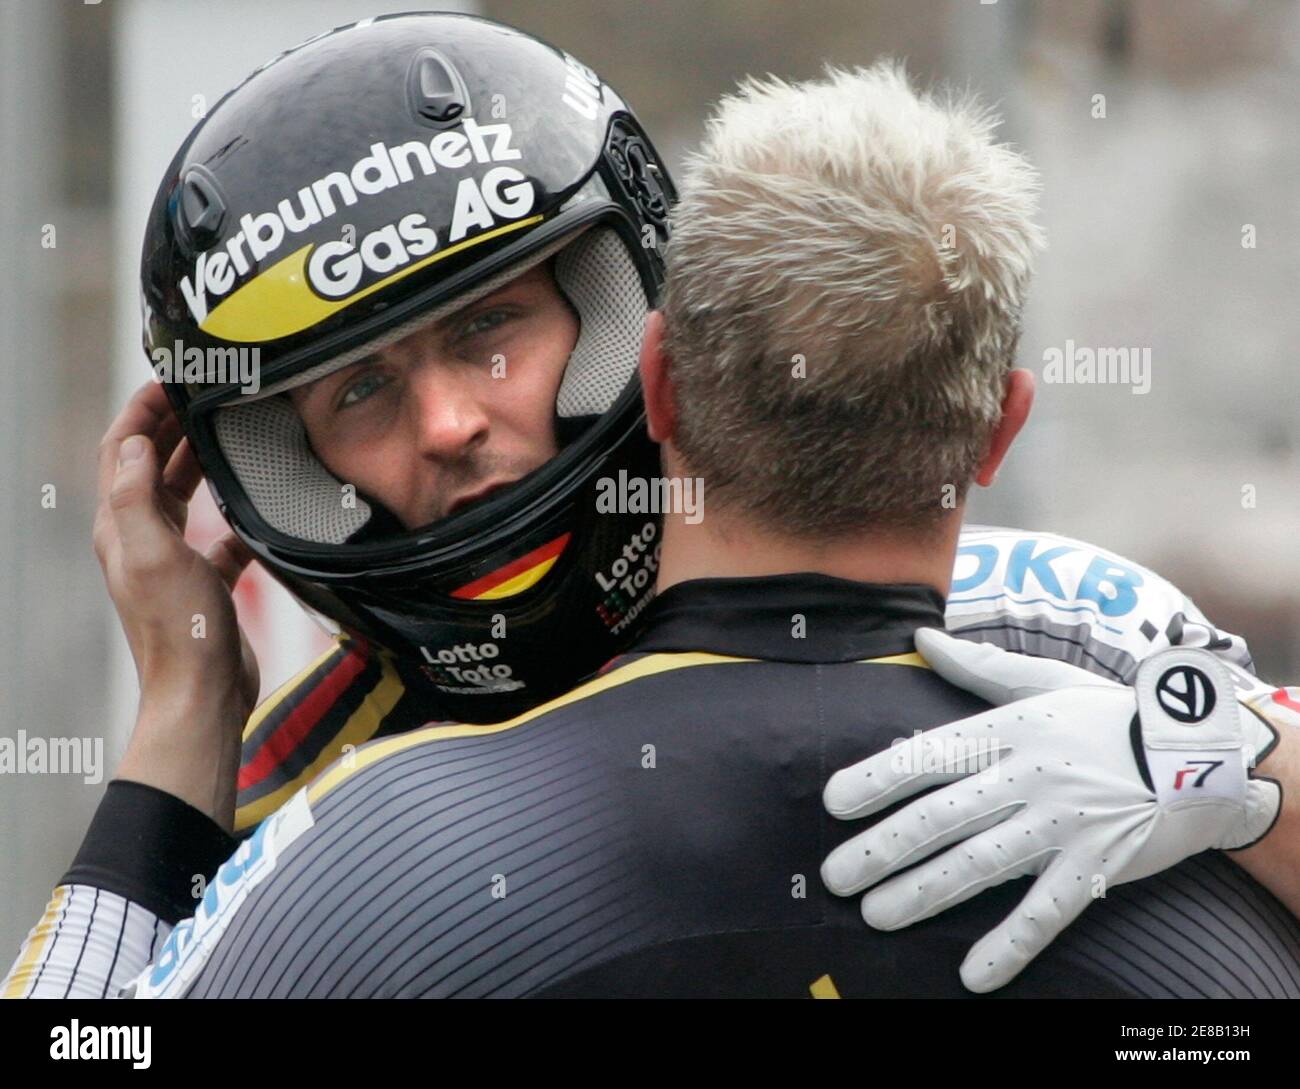 Team Germany 1 with Andre Lange (R) and Kevin Kuske celebrate their victory of the bobsleigh World Cup final race in the southern Bavarian resort of Koenigssee, February 23, 2007. Team Germany 1 won the race ahead of Team Germany 2 with Matthias Hoepfner and Andreas Porth and Team Canada 1 with Pierre Luders and David Bissett.   REUTERS/Alexandra Beier (GERMANY) Stock Photo